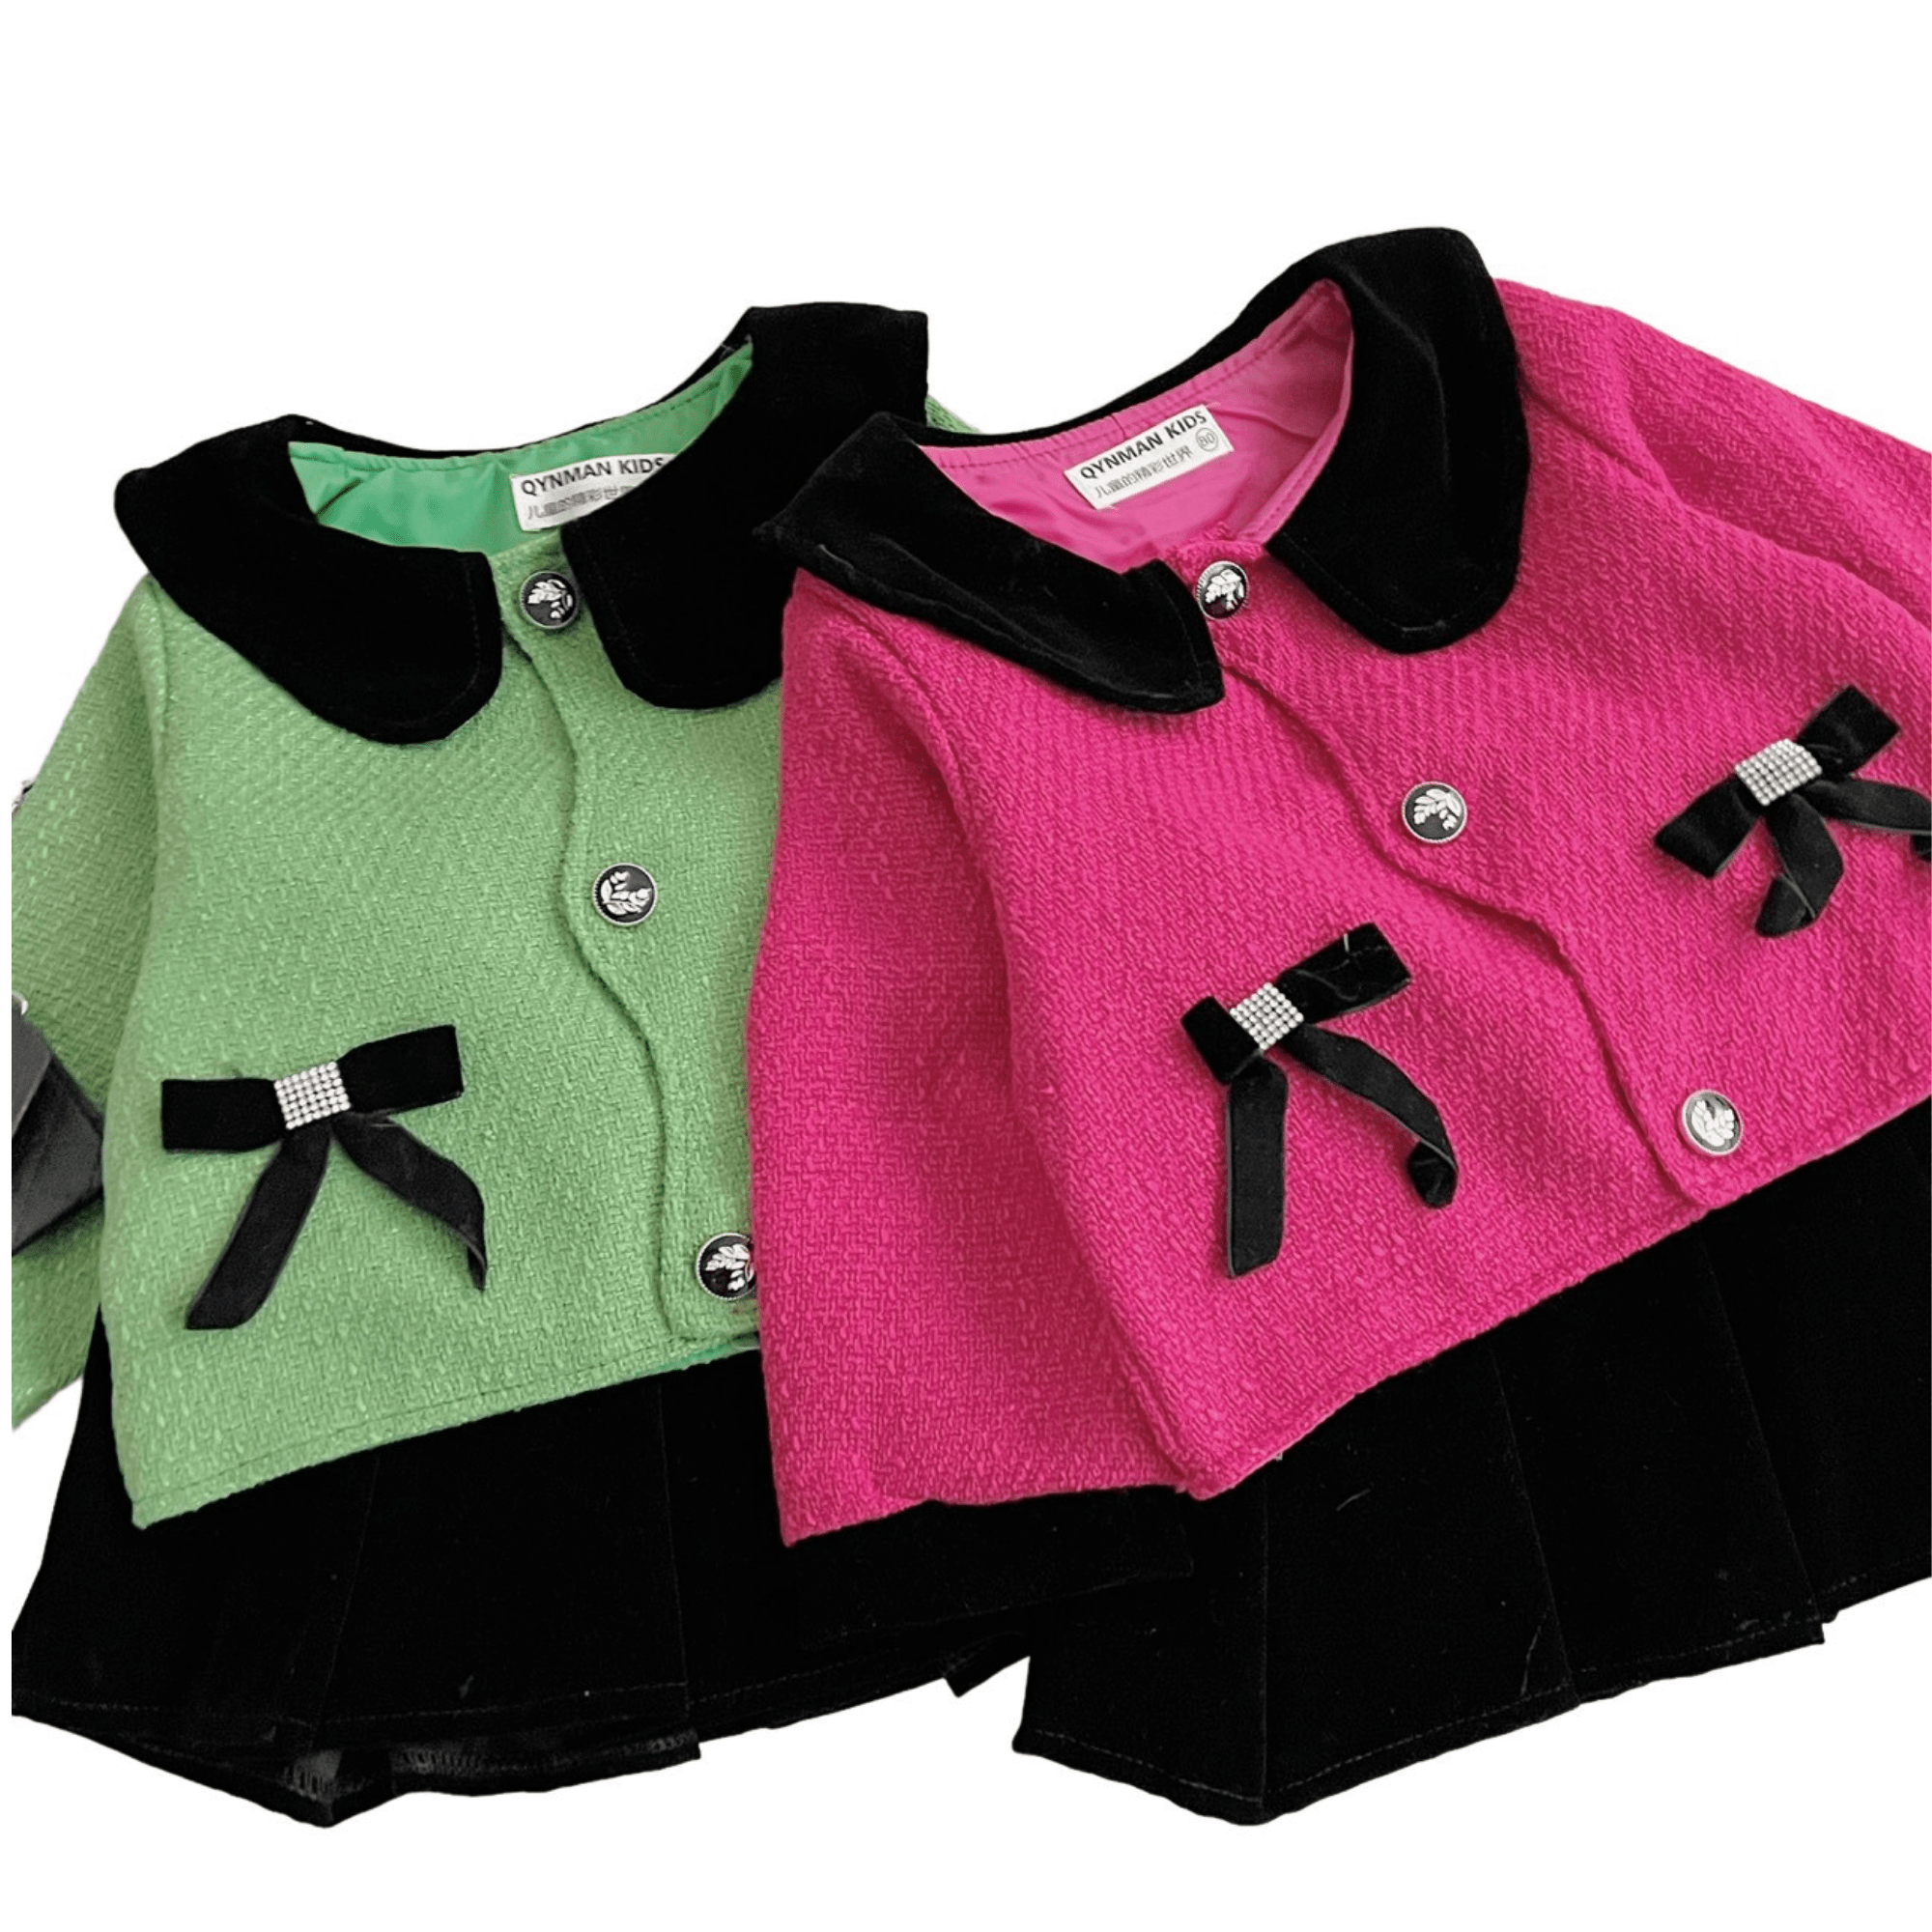 Winter Clothes For Kids Reasonable Price 100% Wool Dresses Casual Each One In Opp Bag Vietnam Manufacturer 2